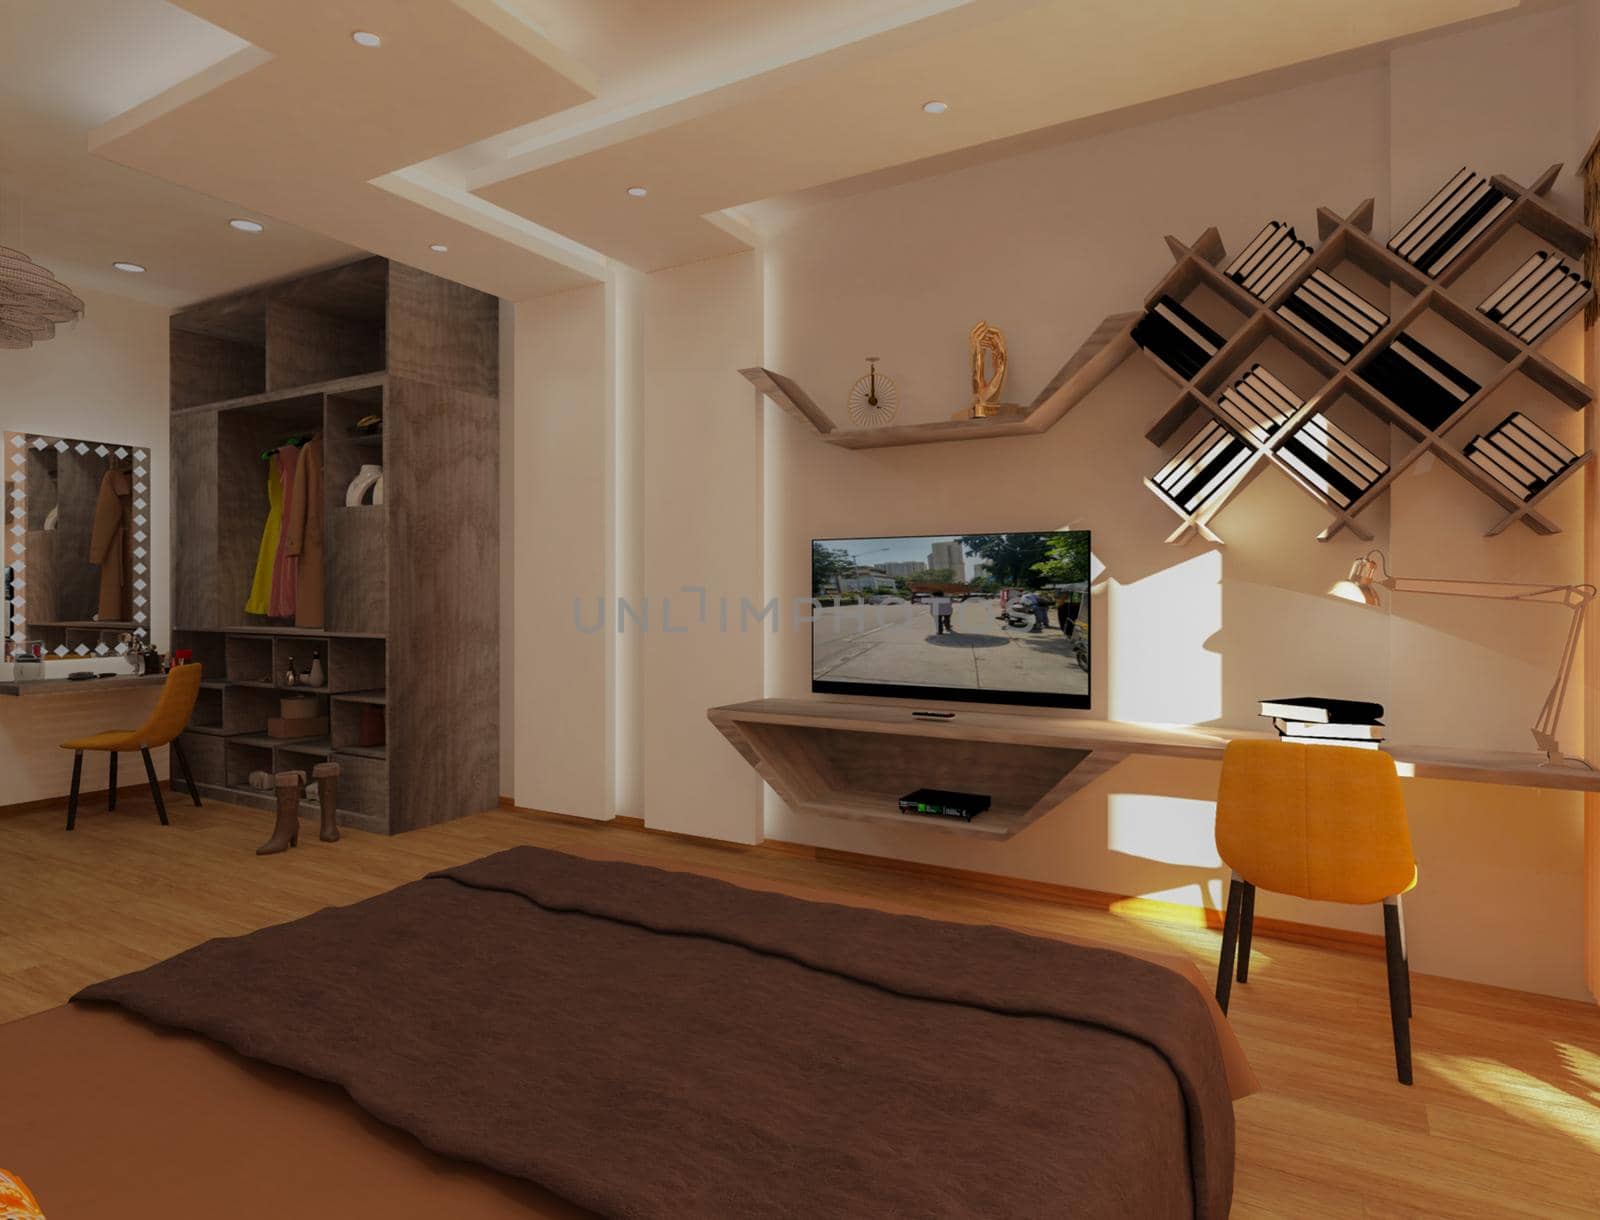 3d rendered bedroom design tv unit with study table. 45 degree overhead bookshelves. by Maharana777